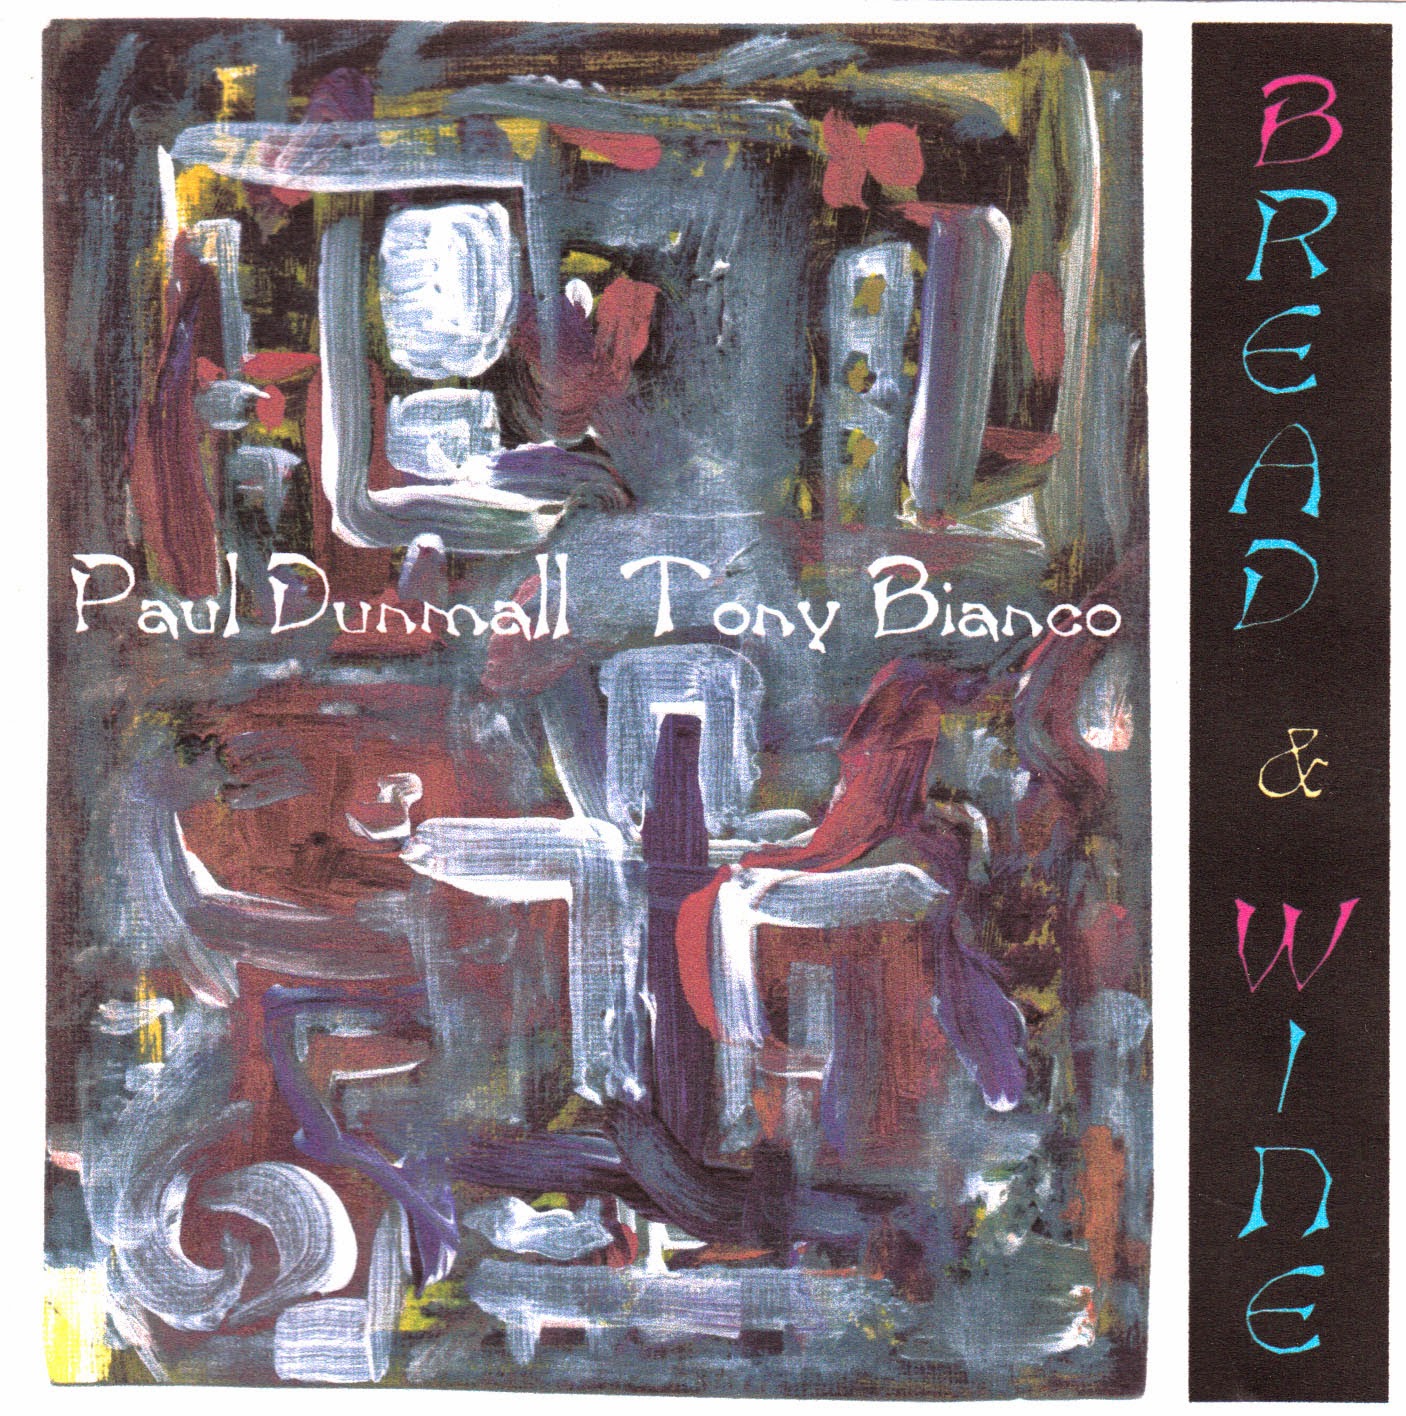 PAUL DUNMALL - Bread And Wine cover 